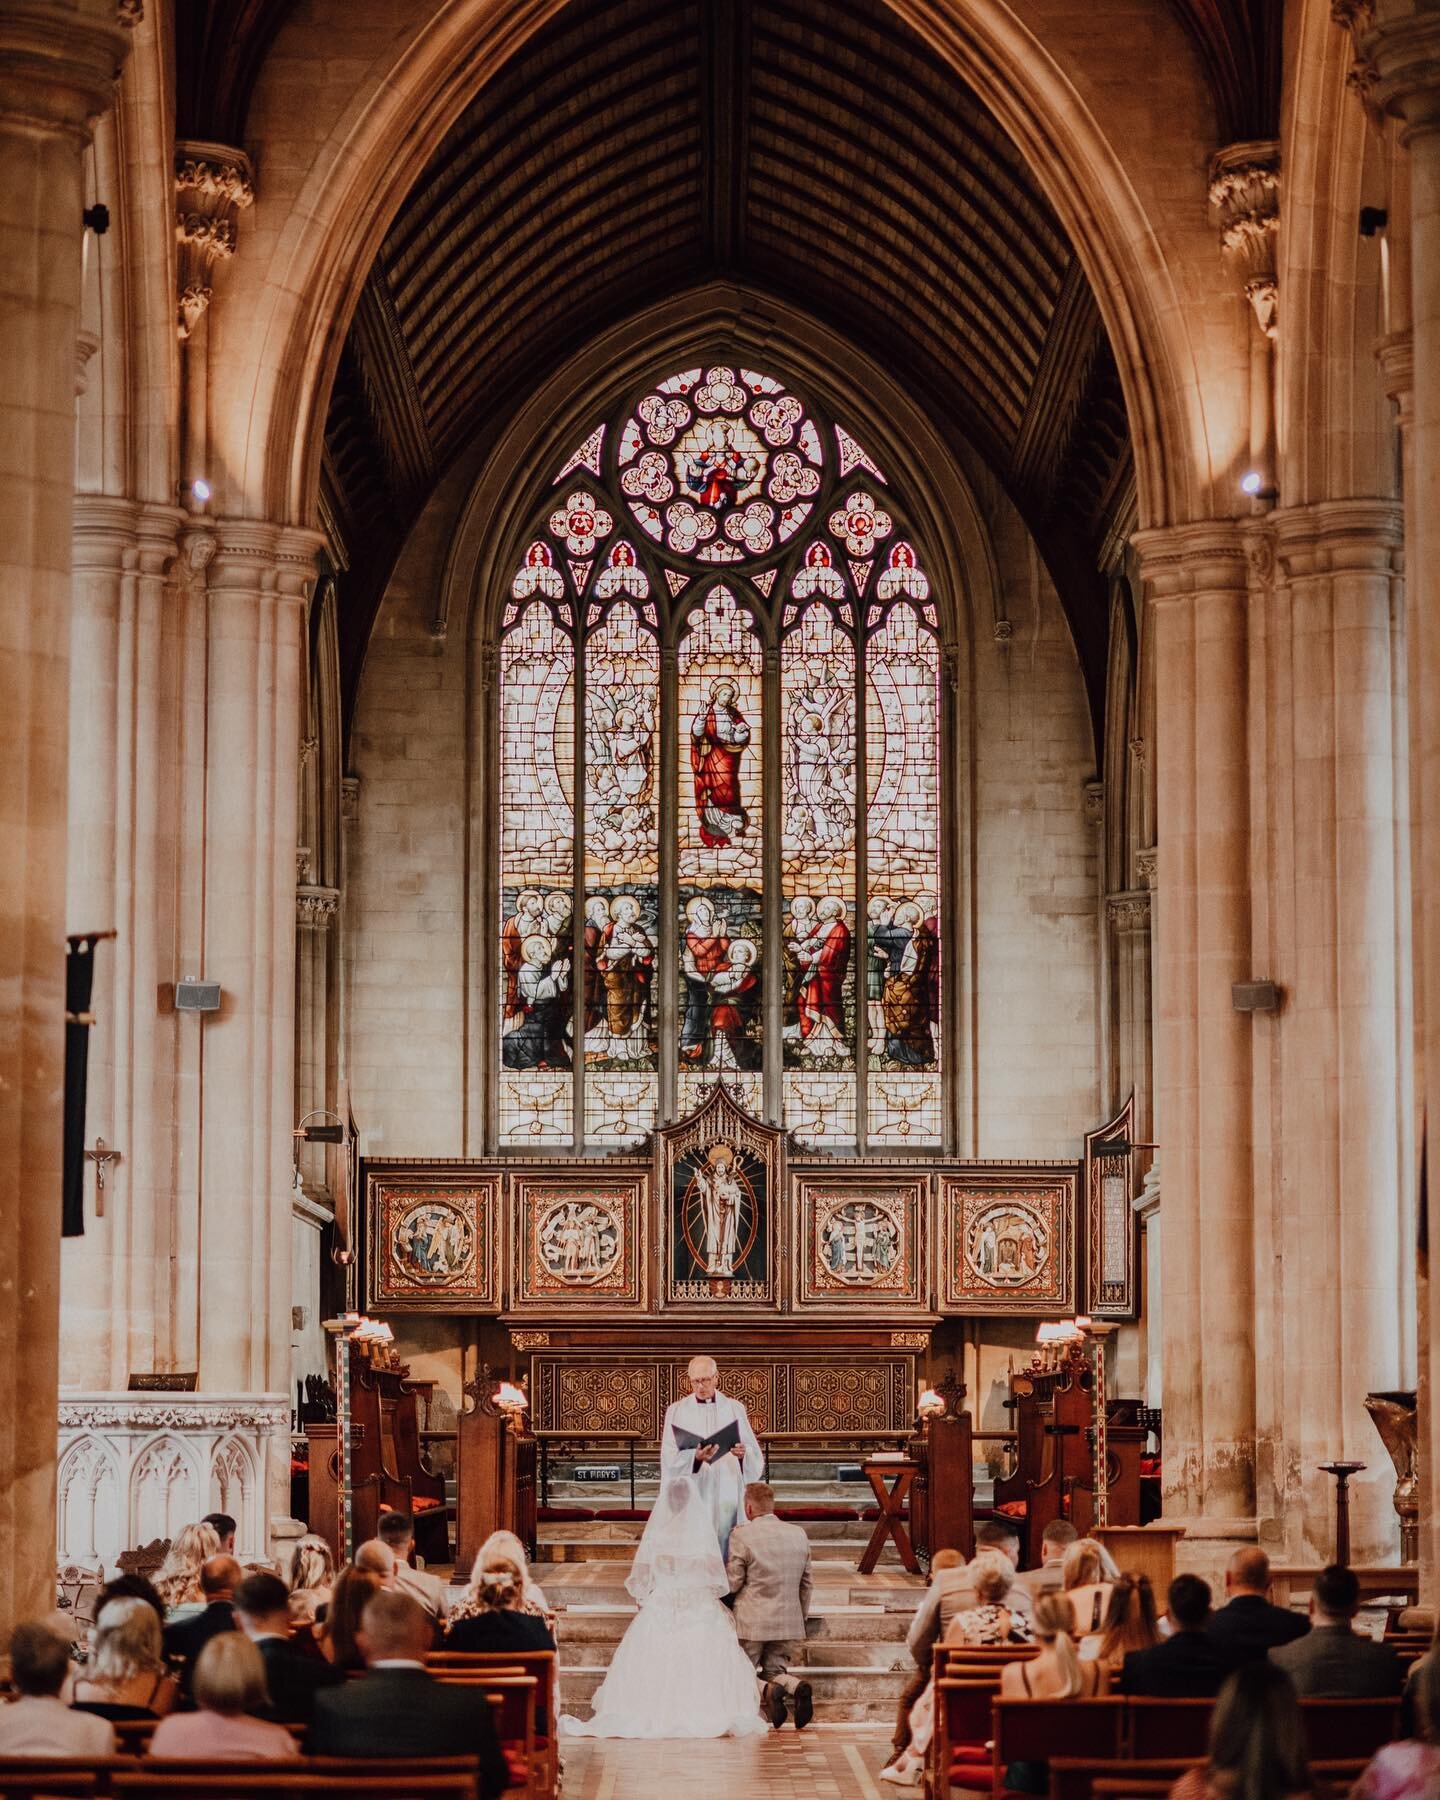 My favourite pic from Wendy and Vinnies wedding! Shame about the top and bottom being chopped off, Instagram crop is absolutely killing me here 🥲

They got married at the Priory Church of St Mary in Chepstow. What a bloody church btw! 

Diary is ope